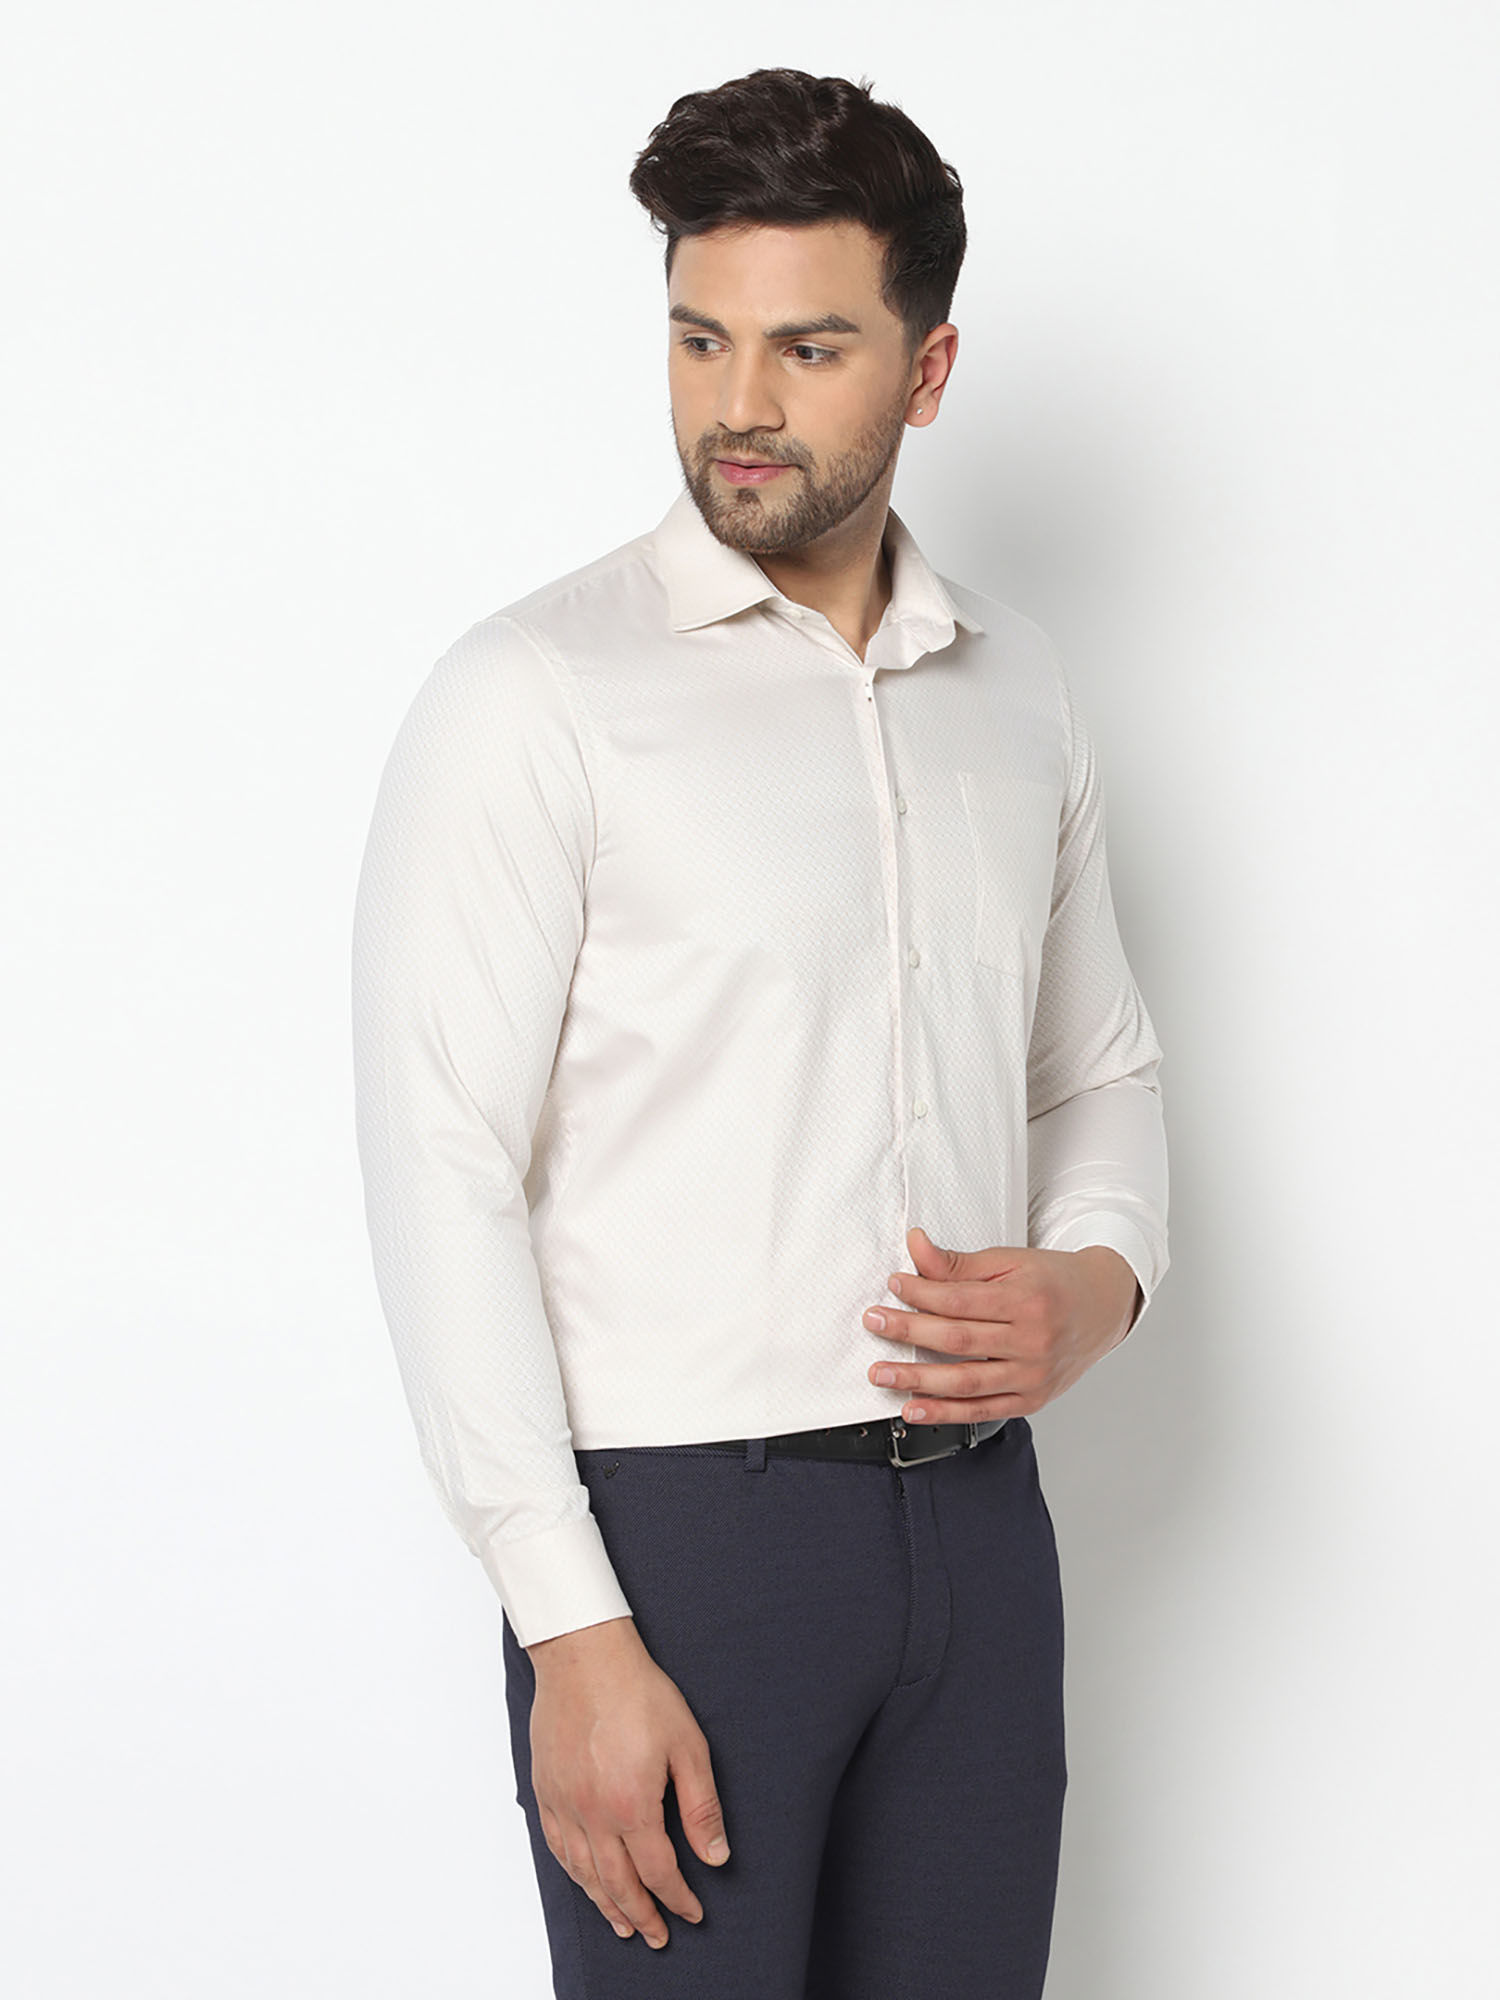 STAY ON TOP OF YOUR GAME WITH FORMAL SHIRTS by Asvi Arora - Issuu